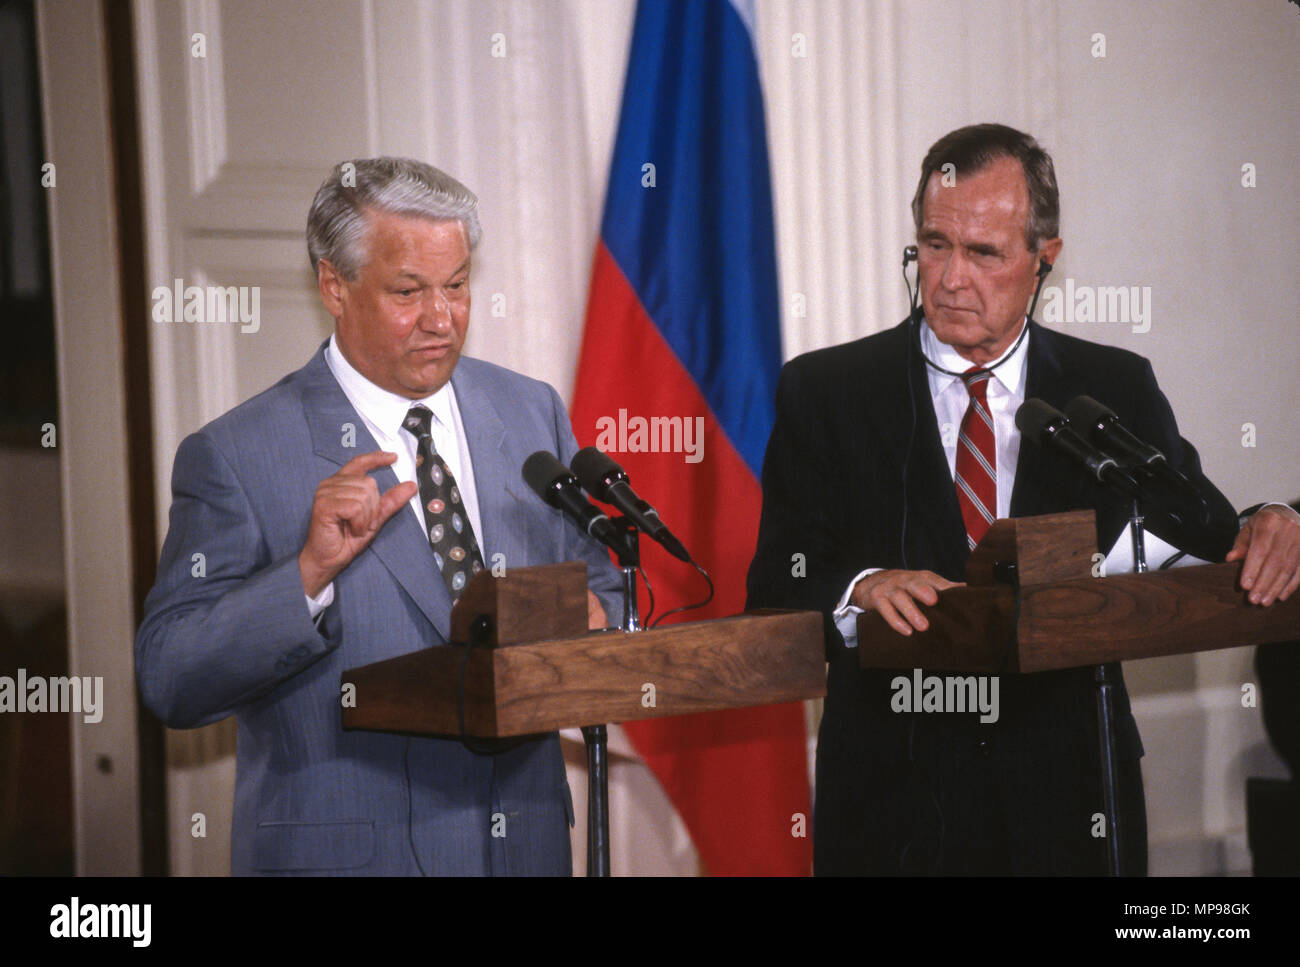 WASHINGTON, DC, USA - JUNE 17, 1992: Russia President Boris Yeltin, left, speaking at news conference in East Room of White House during summit with President George H.W. Bush. Stock Photo